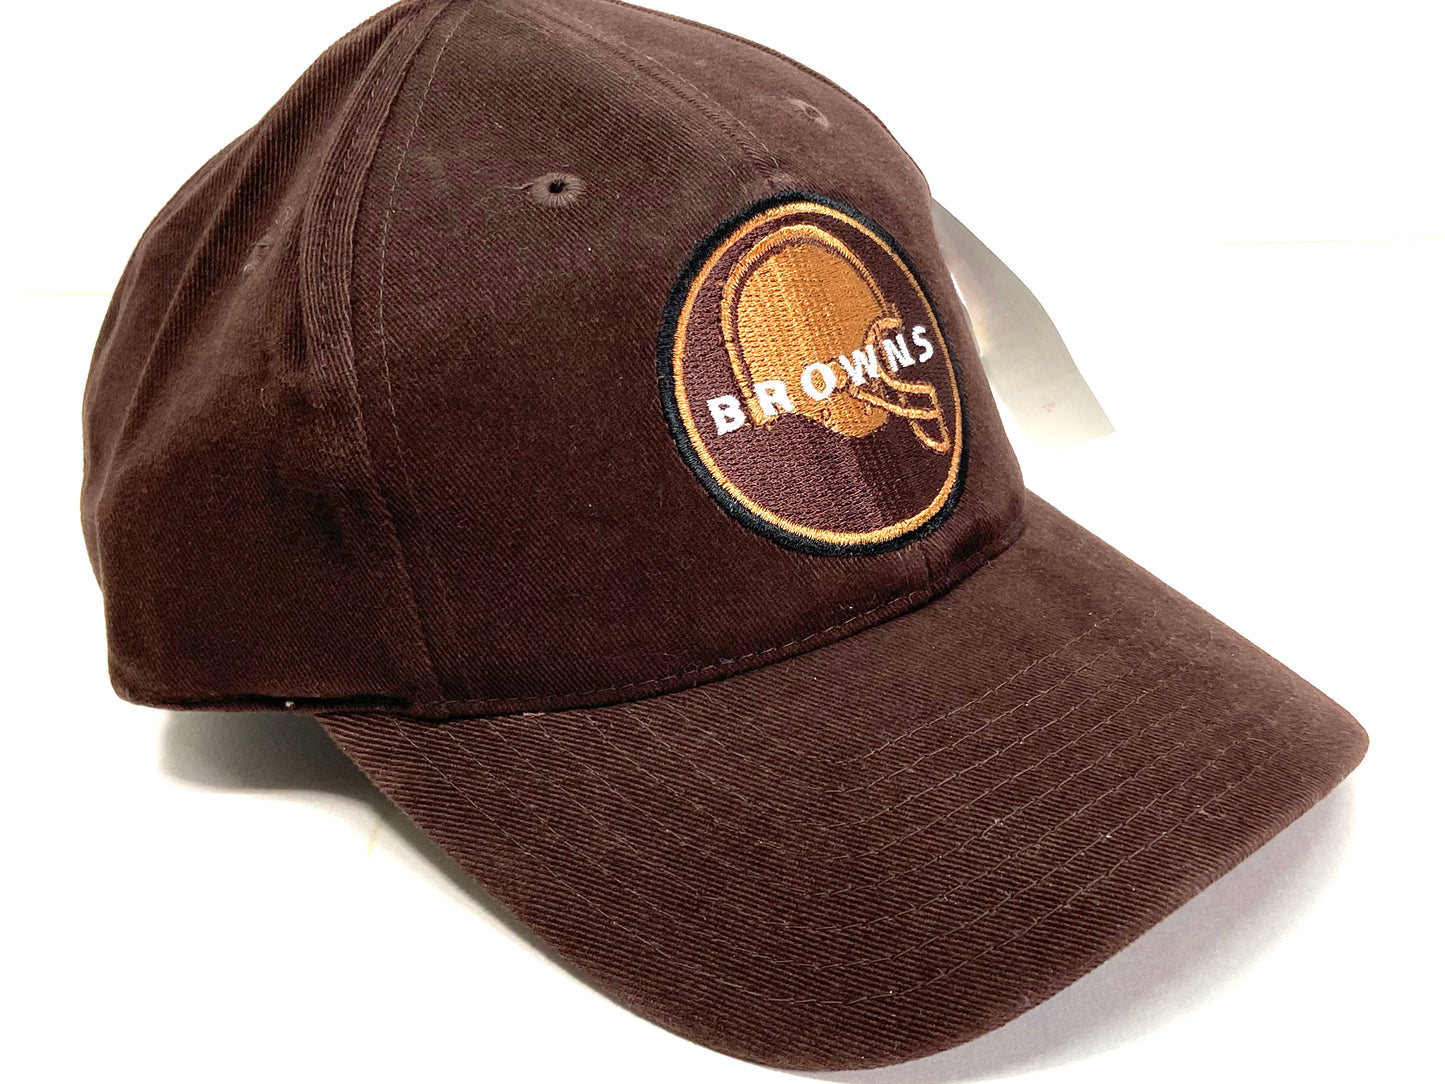 Cleveland Browns Vintage NFL Brown Circle Logo Cap by American Needle